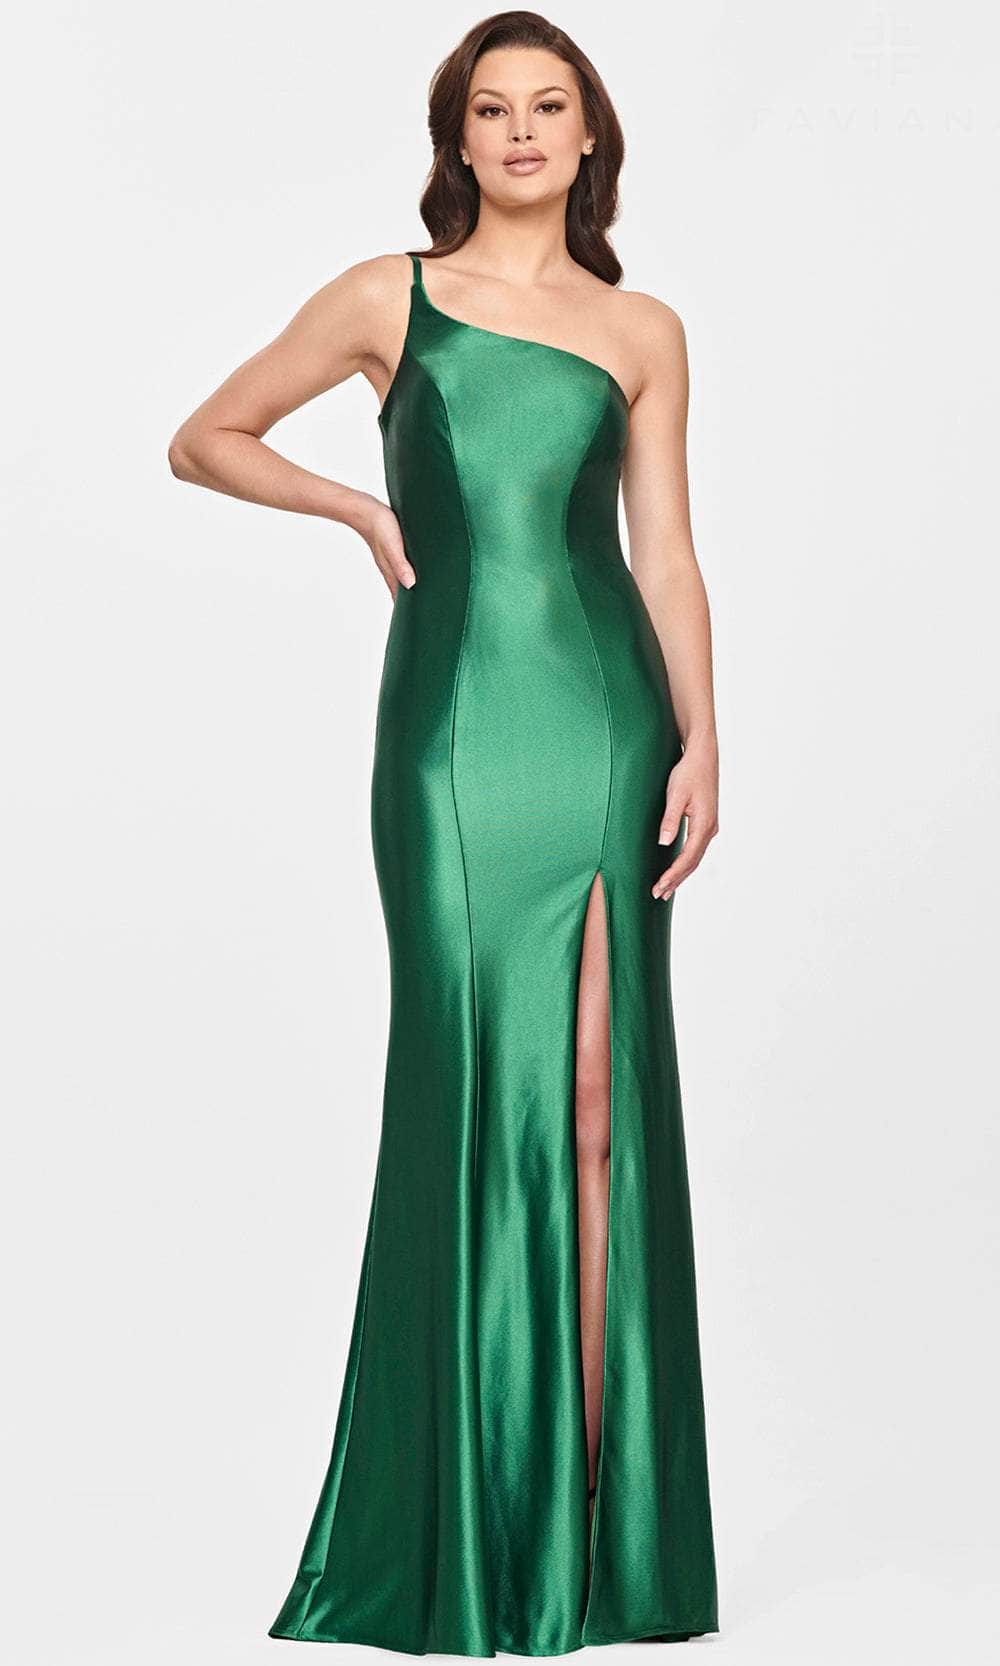 Image of Faviana S10811 - Asymmetric Neck Seamed Evening Gown